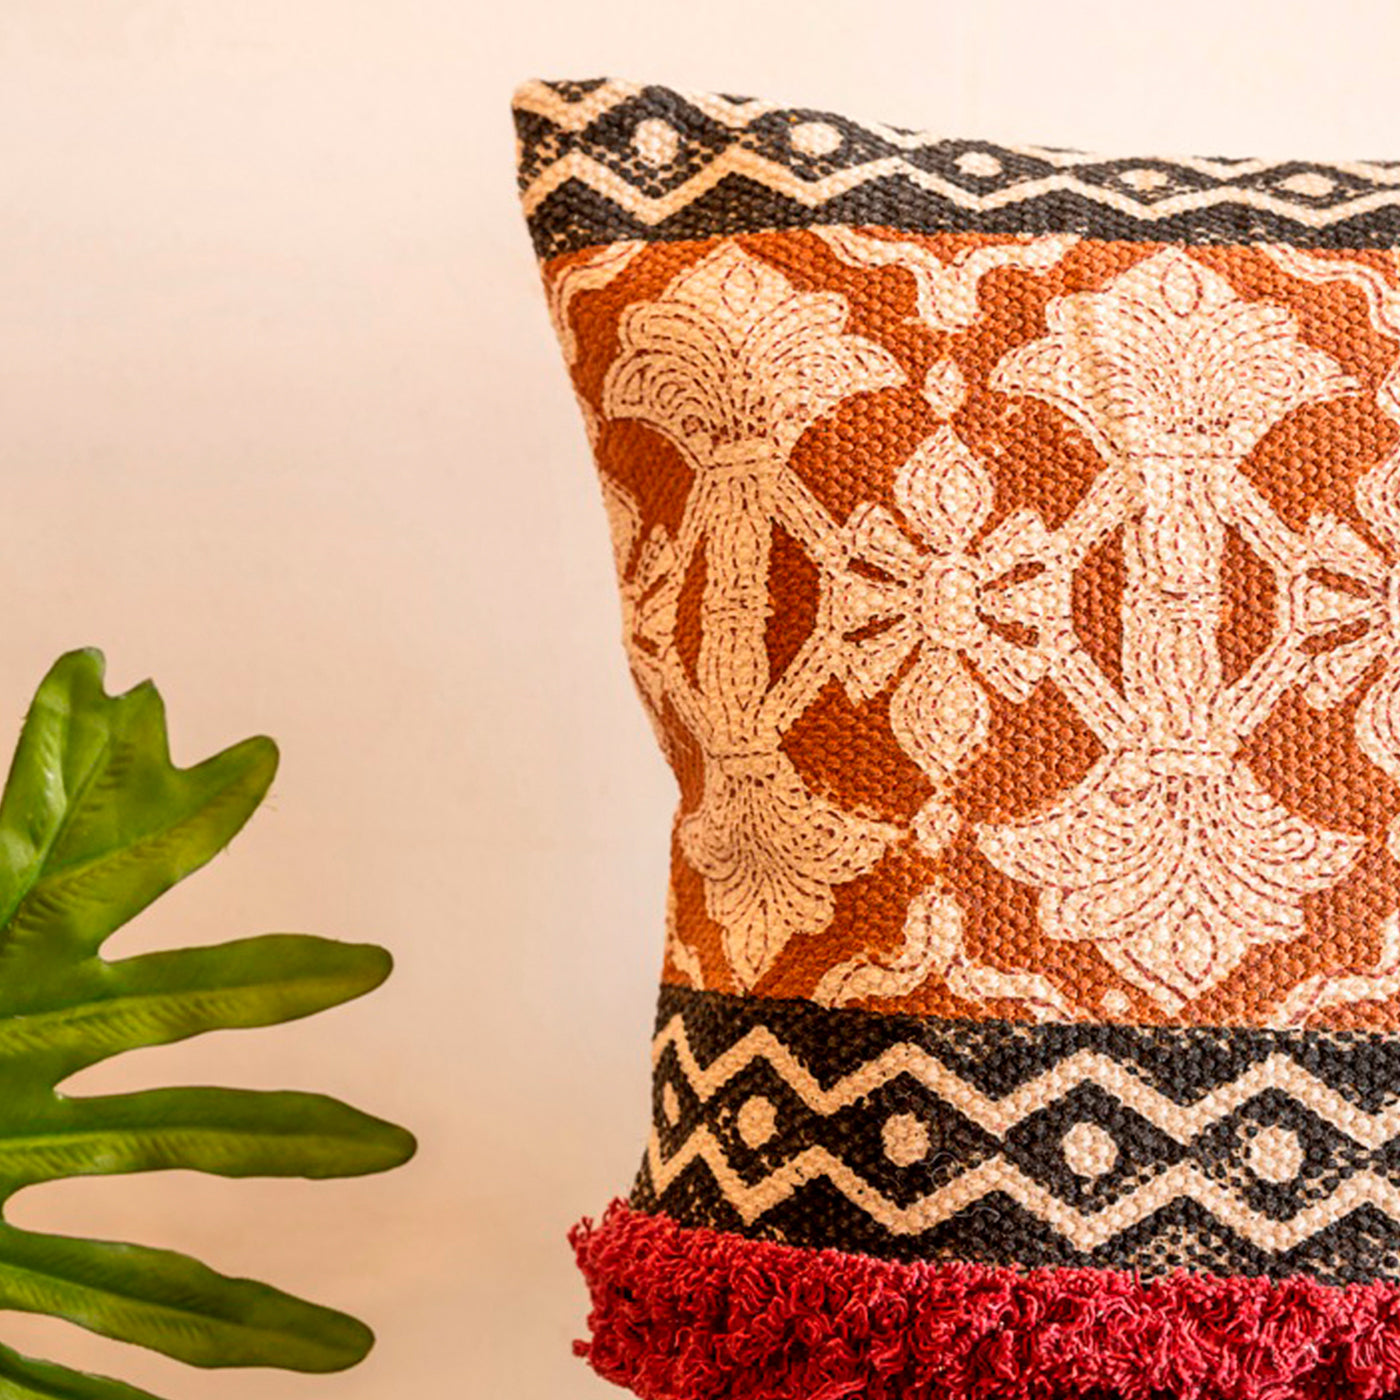 Printed Decorative Cushion Cover for Home Decor